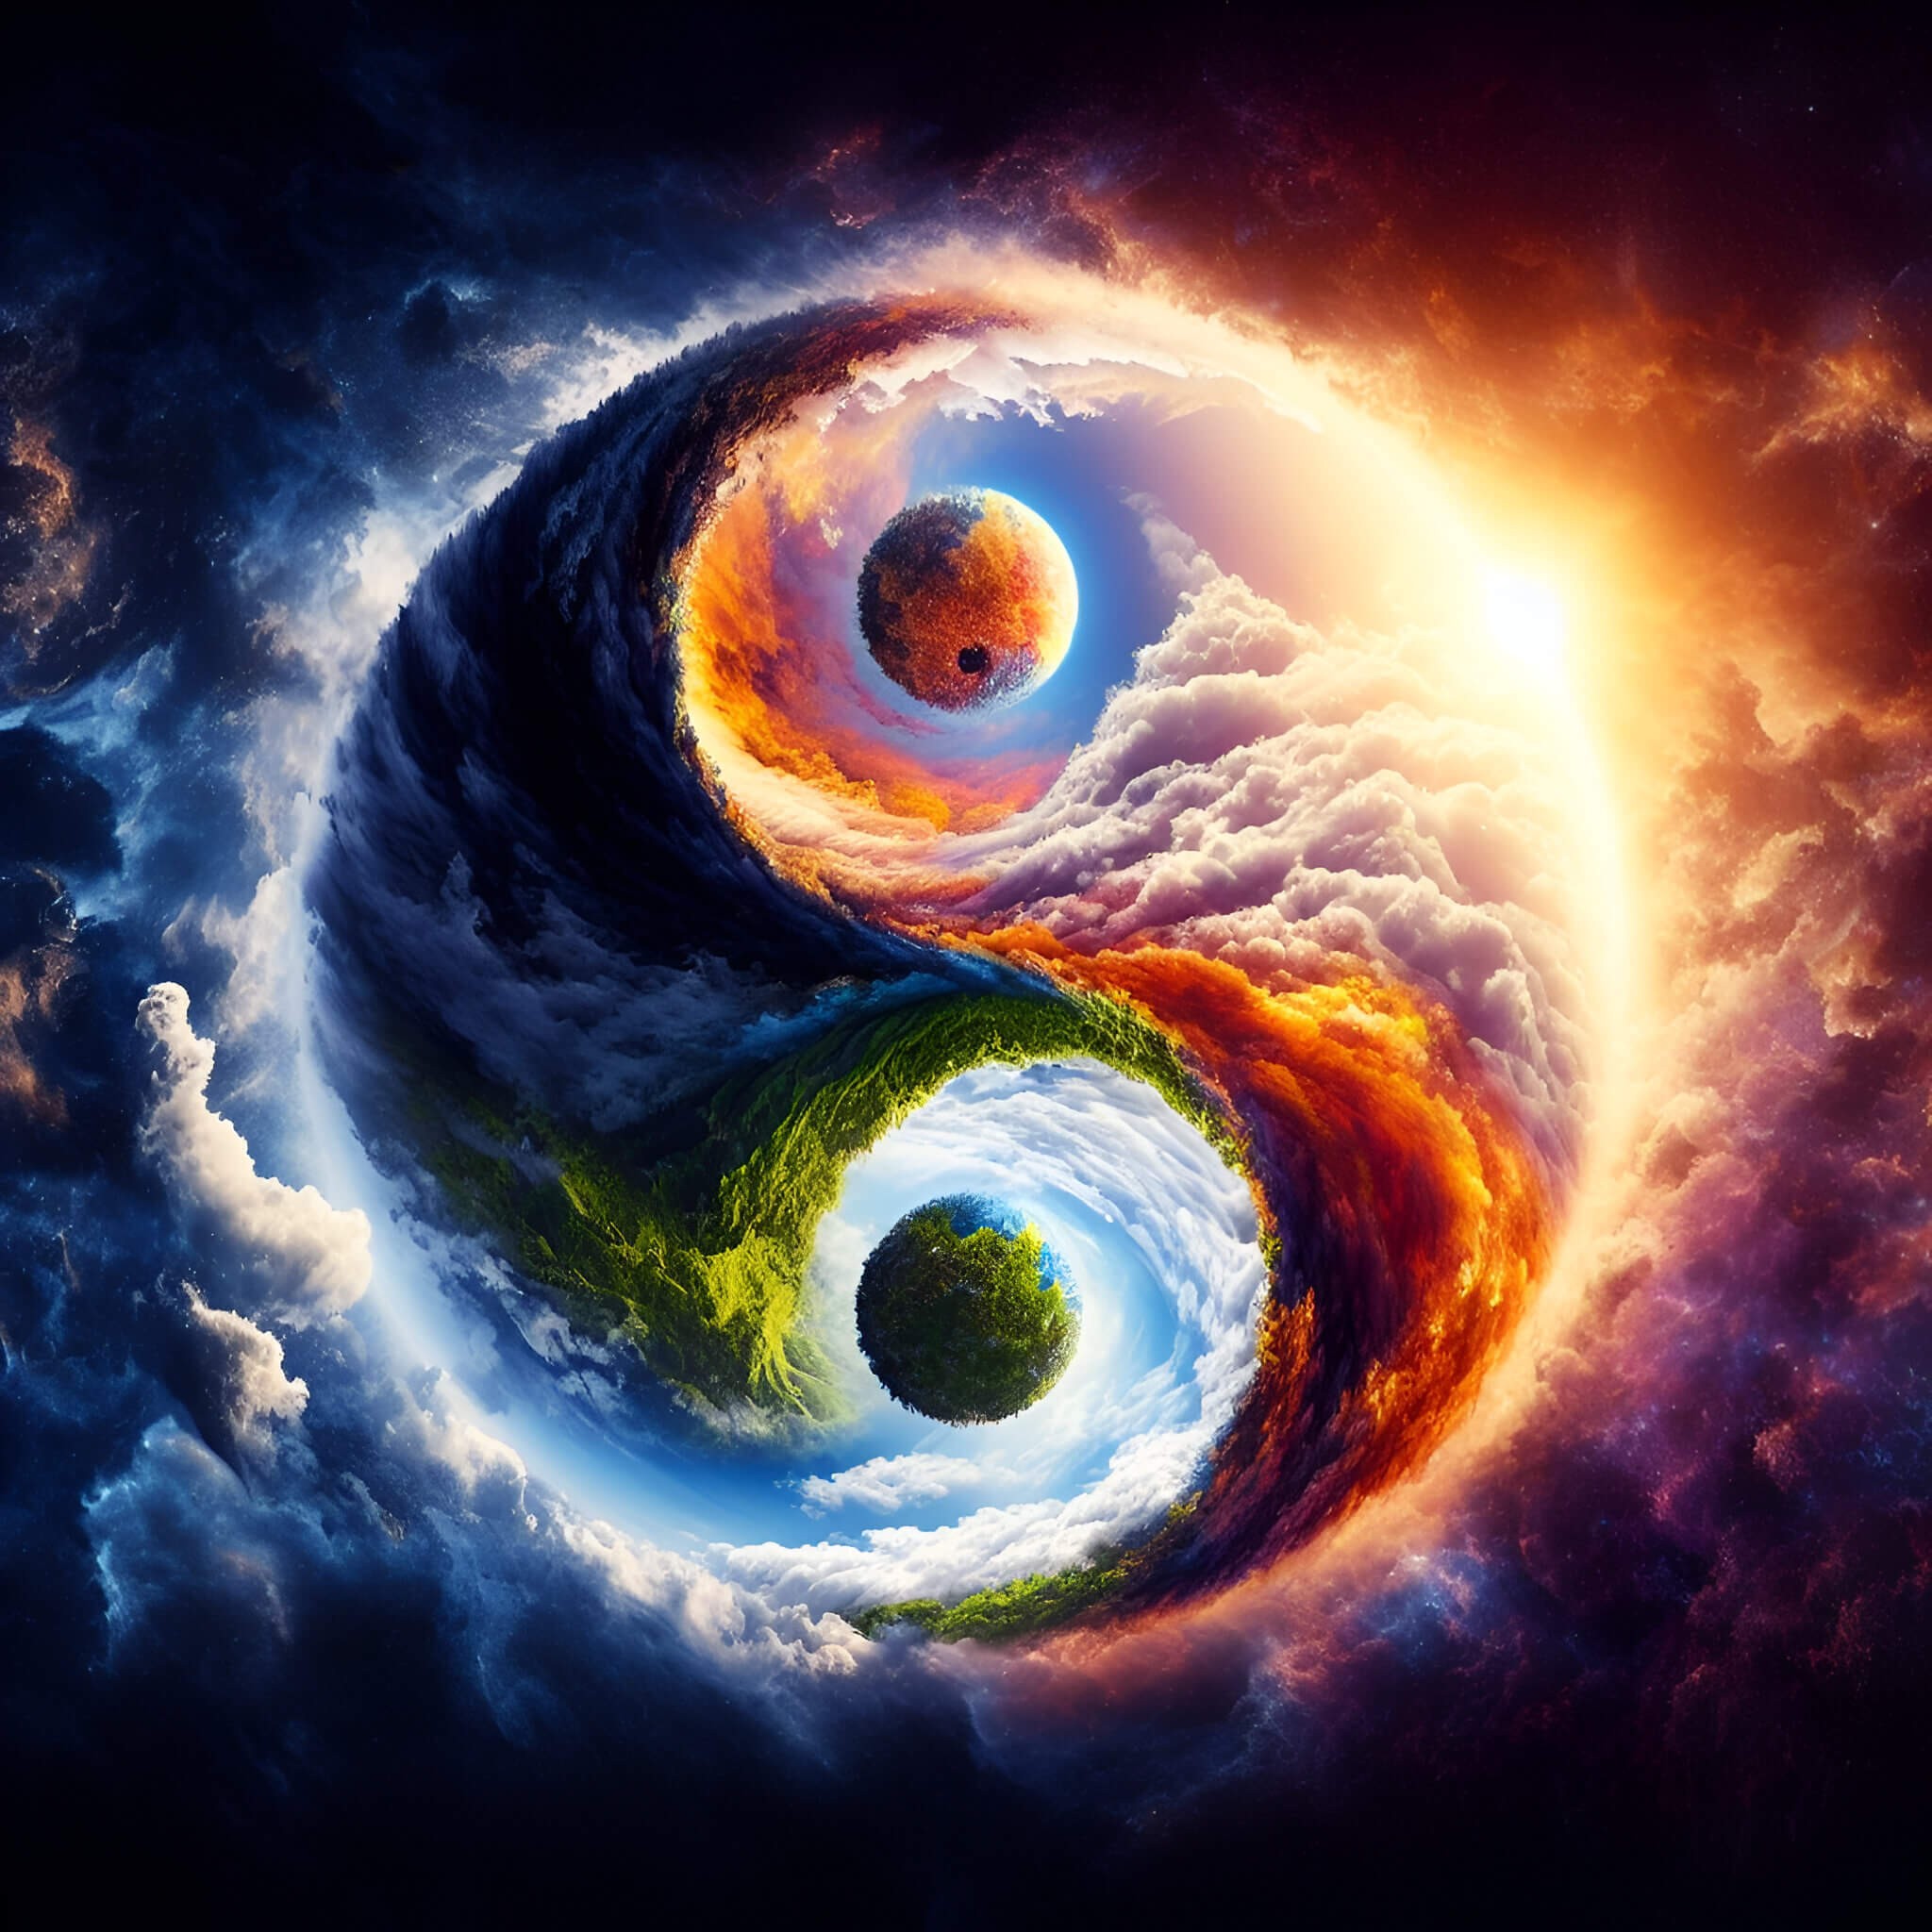 Taoist Yin-Yang symbol from Hsin Hsin Ming, representing balance and interconnectedness.